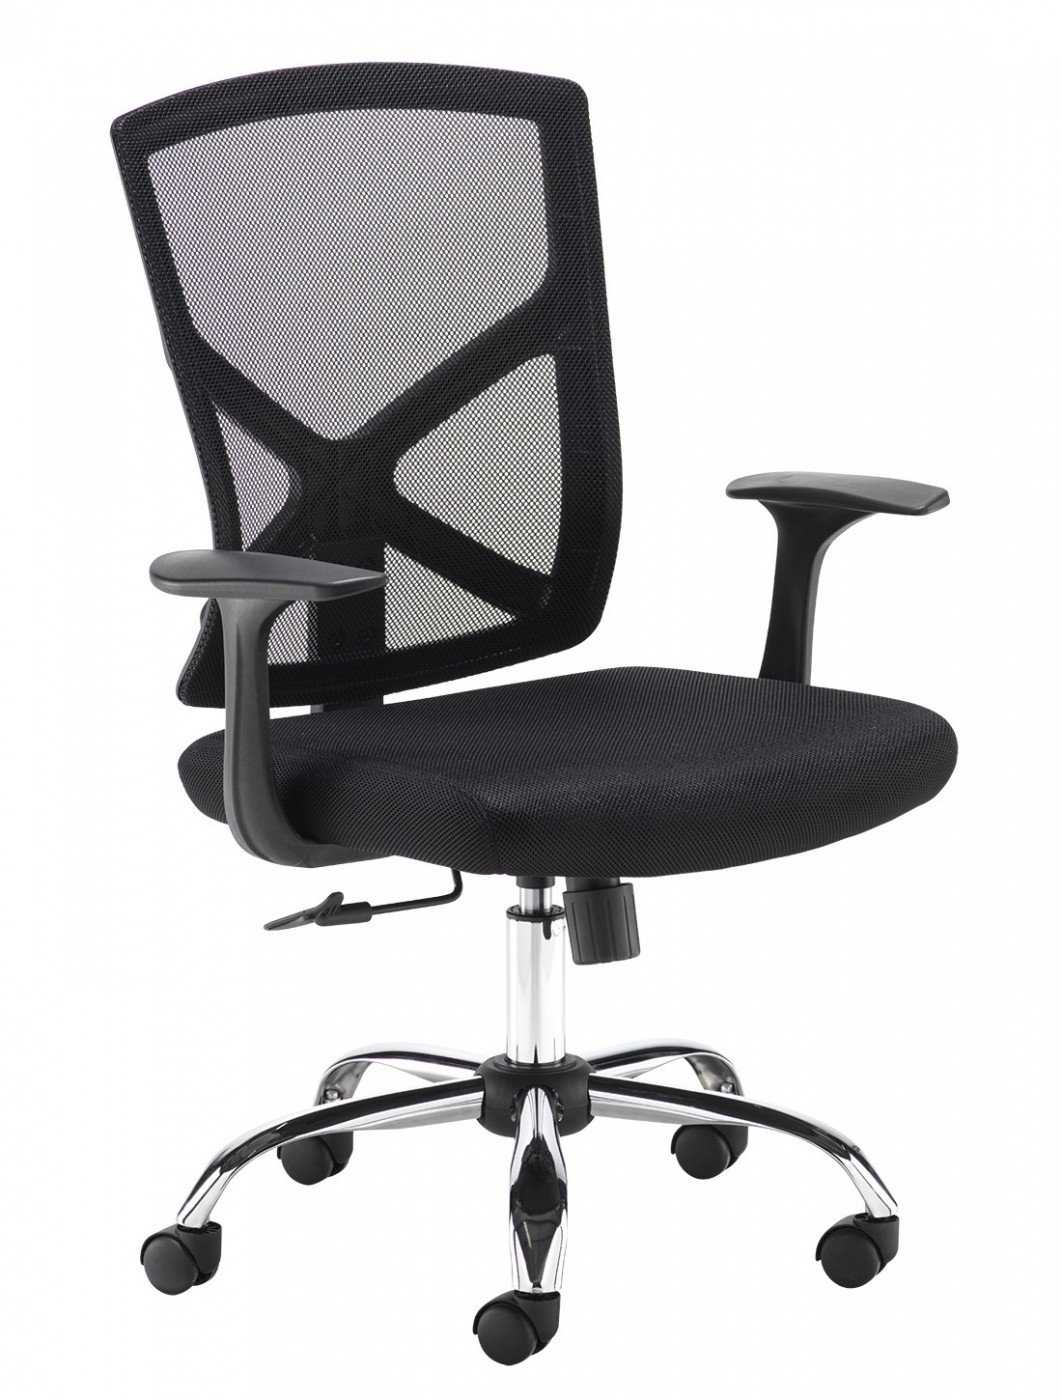 BANQUET CHAIR BQ-1B (BLACK COLOR) Office Partition And Workstation